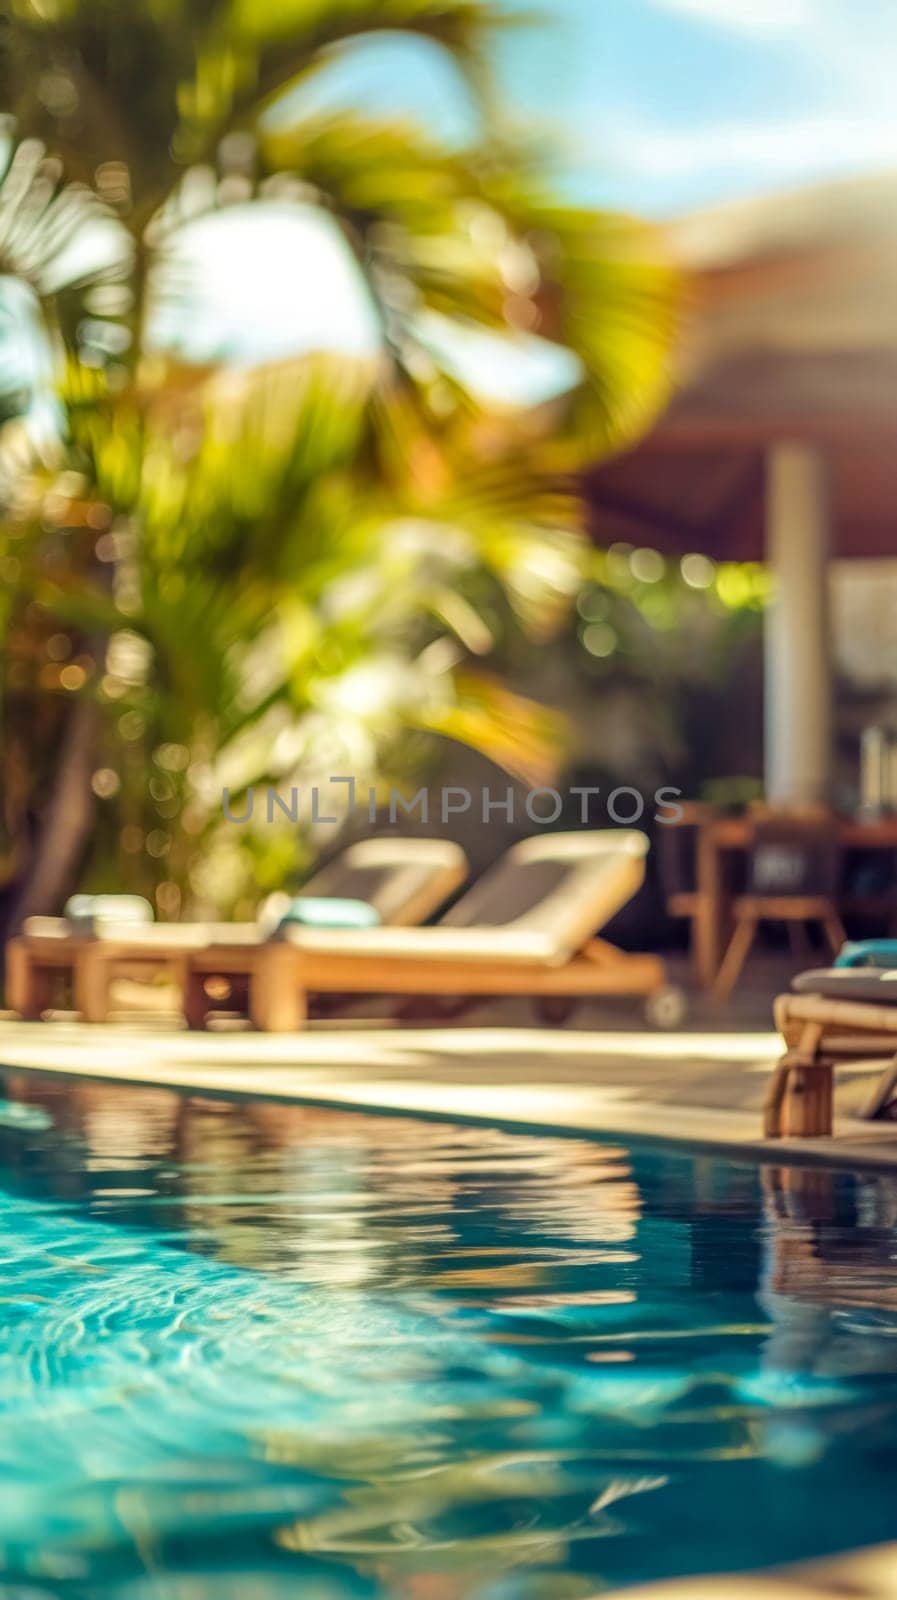 A tranquil and luxurious poolside blurred in the foreground with sun loungers in the background, nestled among lush tropical foliage basking in the sun's warm glow by Edophoto